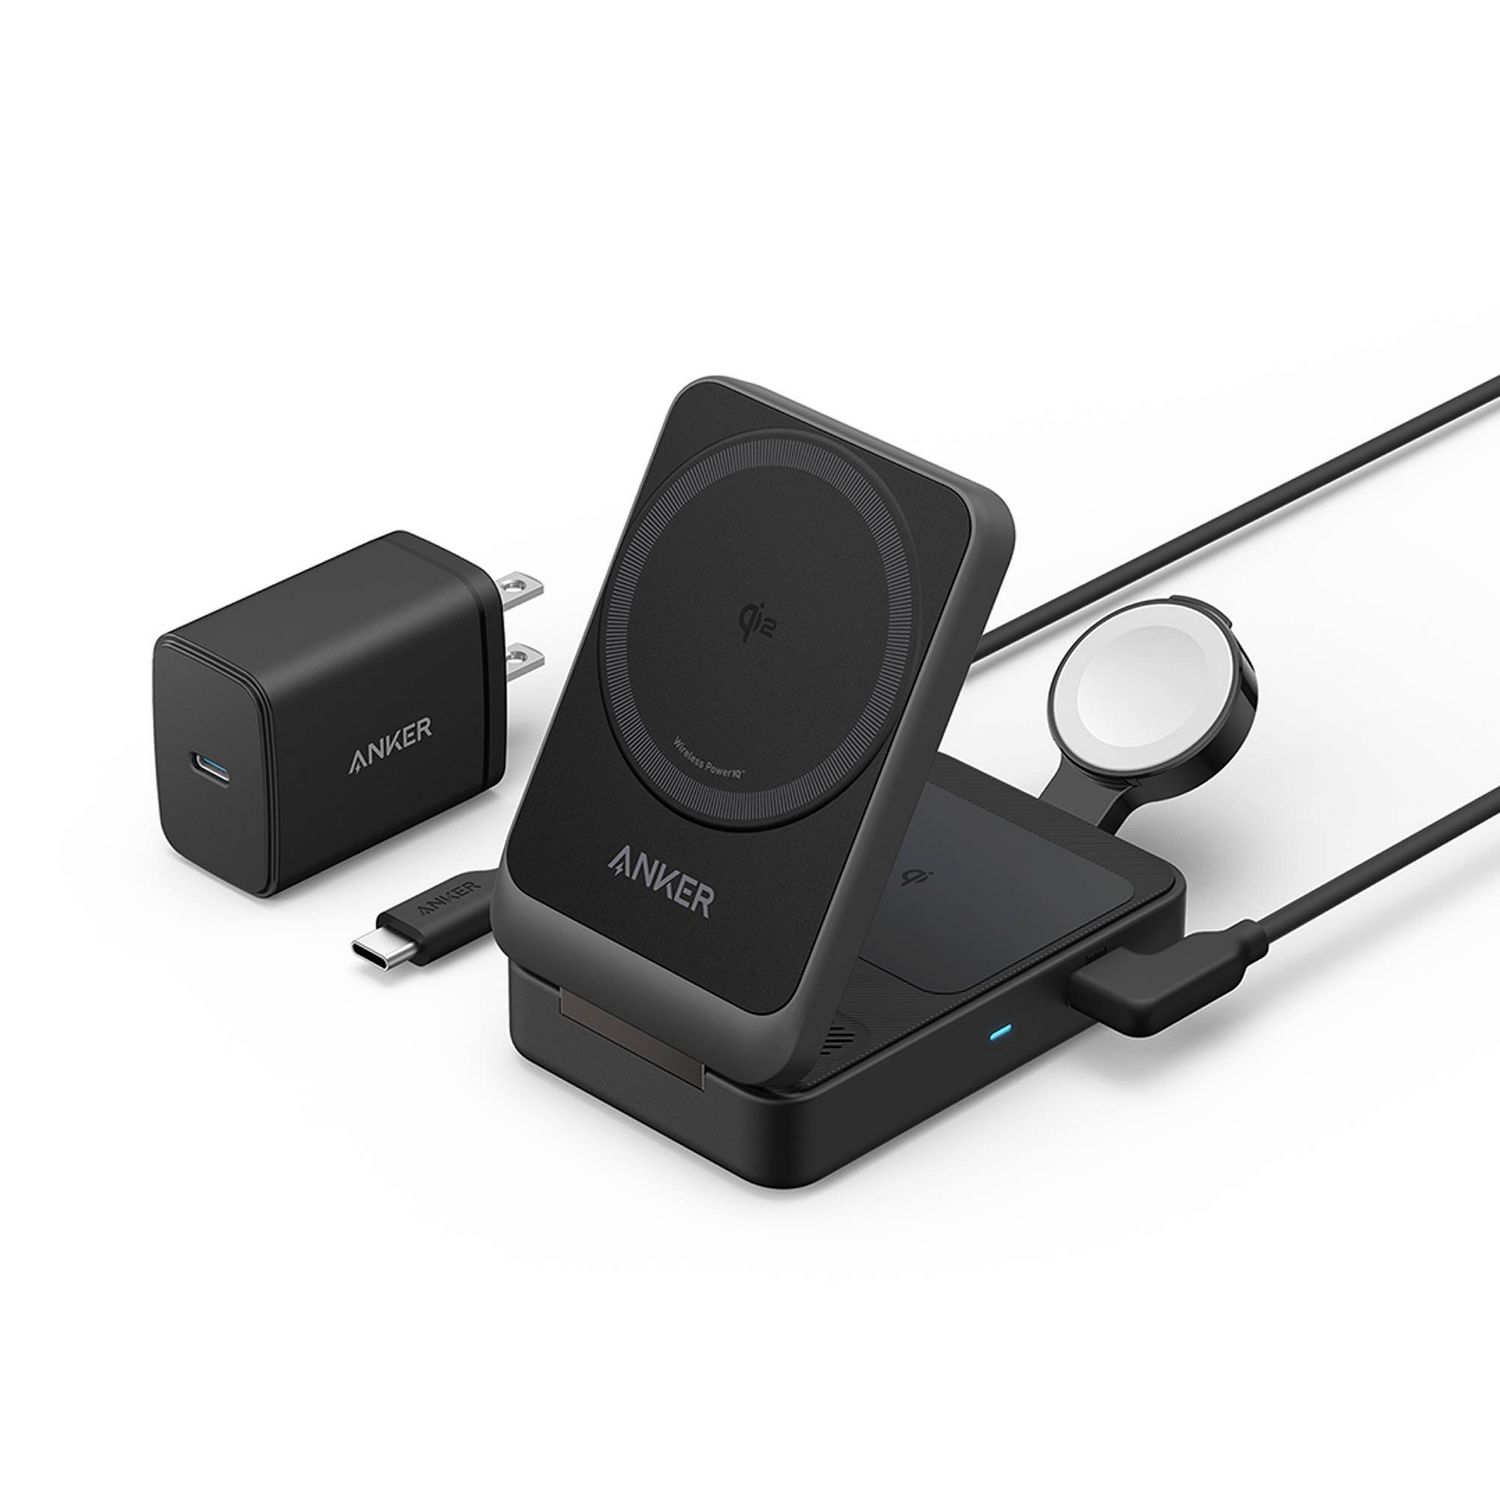 Anker 3-in-1 Magnetic Stand - $92.99